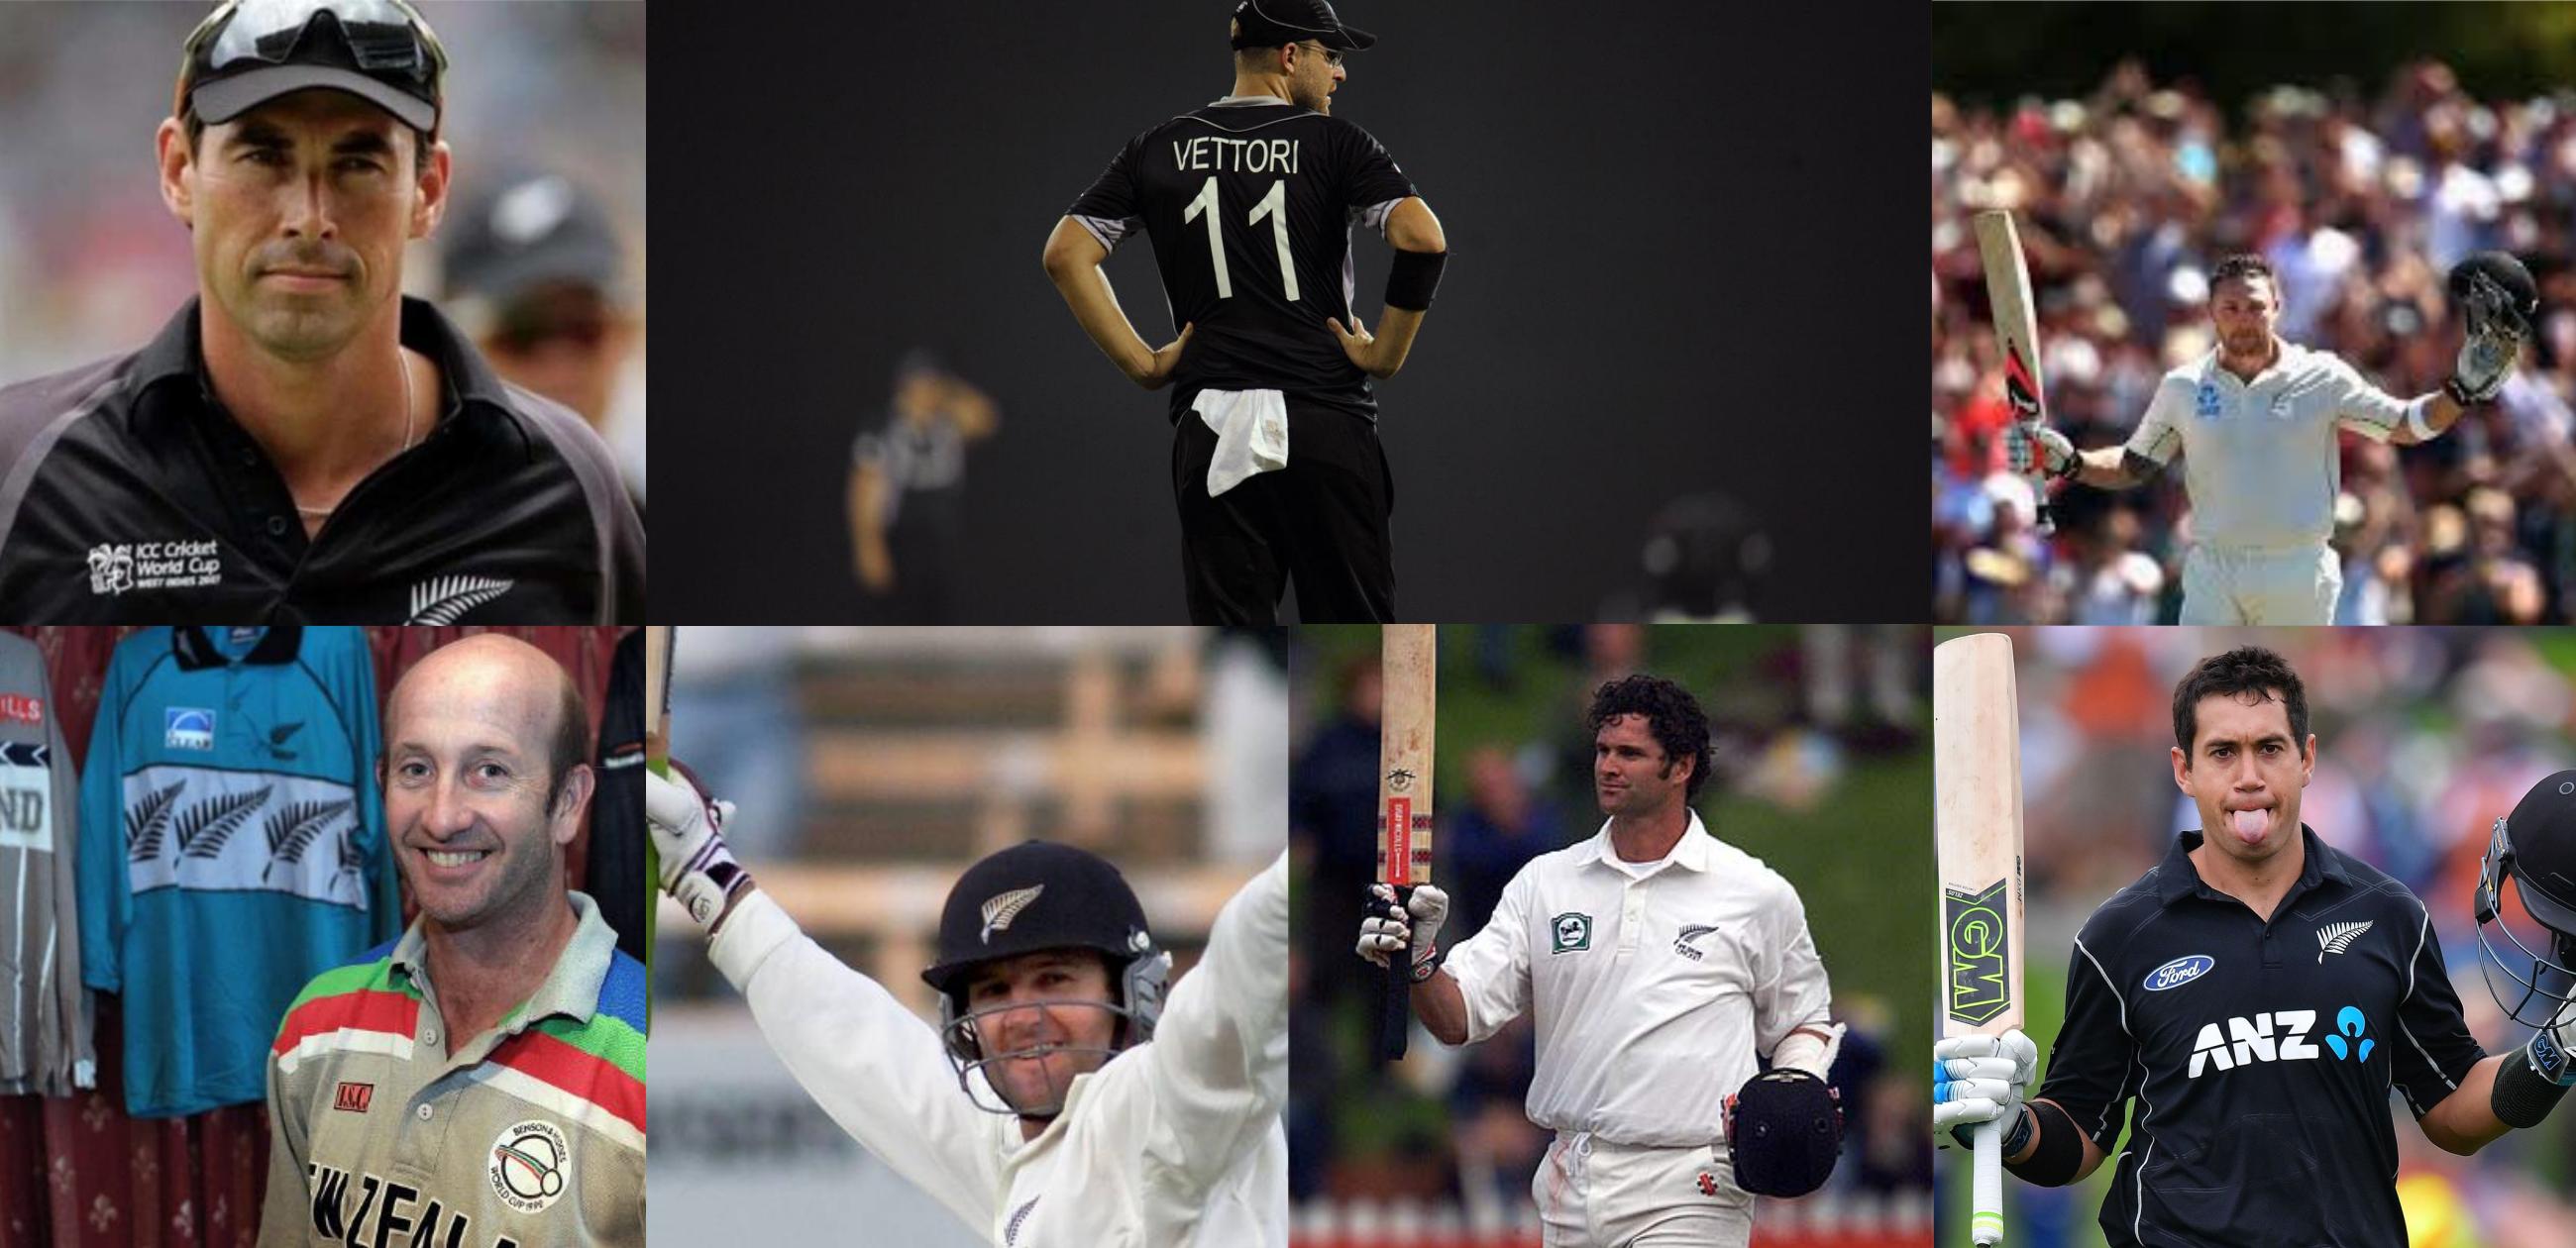 Blackcaps to retire jersey numbers